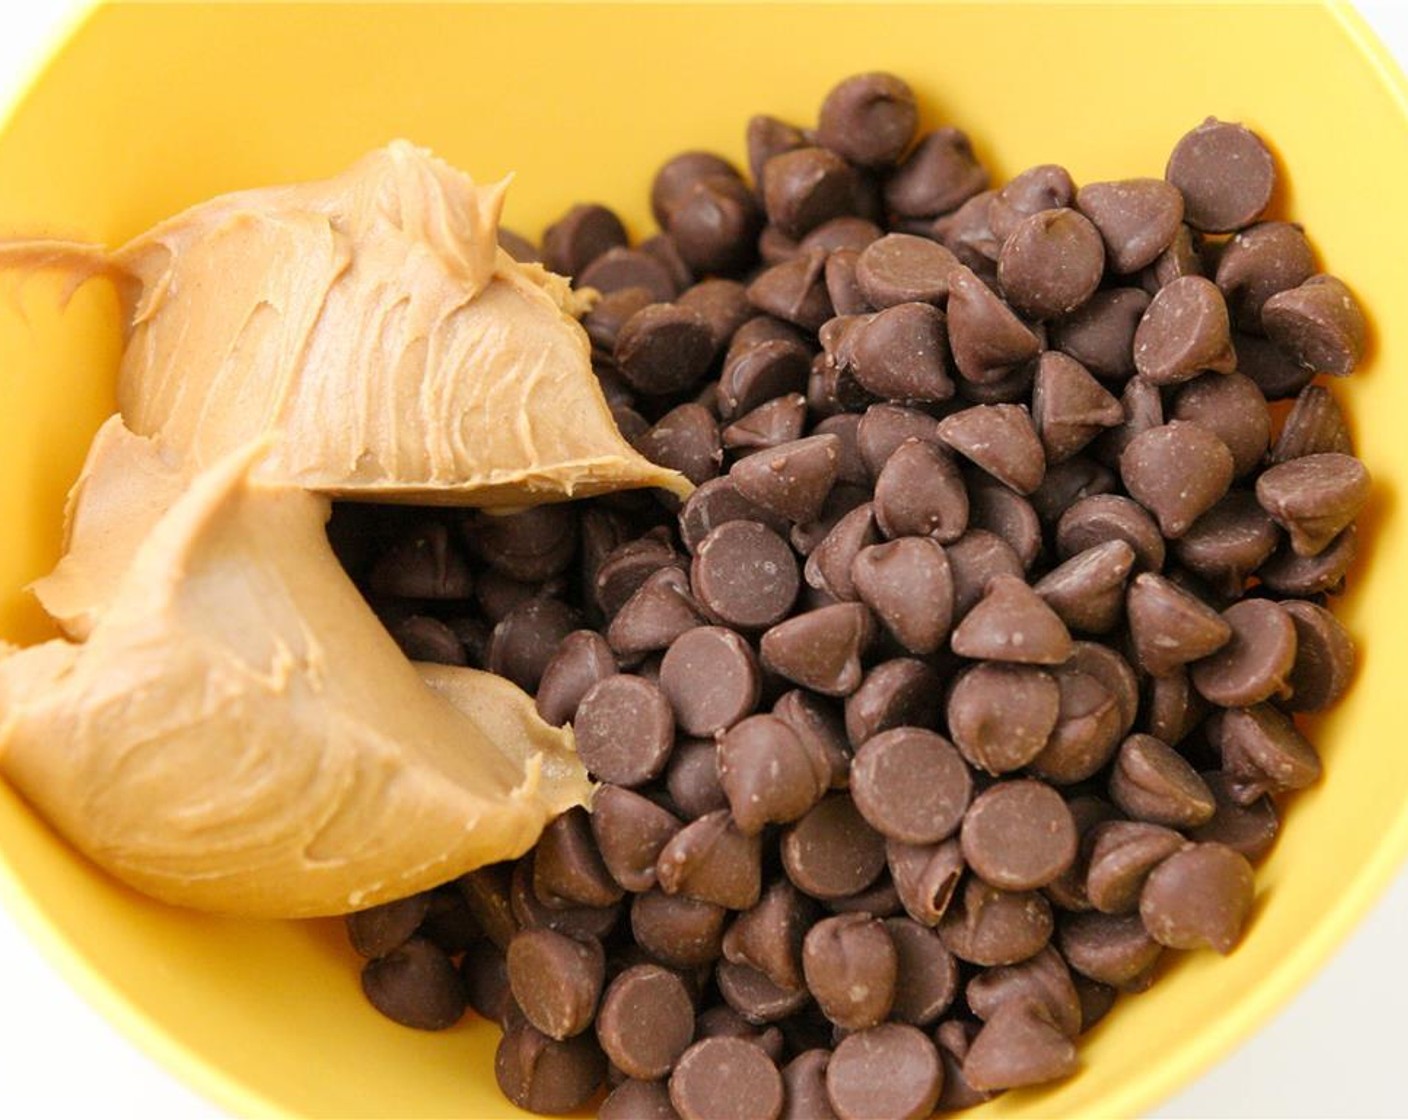 step 11 In a small bowl, combine Milk Chocolate Chips (1 cup) and Creamy Peanut Butter (1/4 cup).  Heat in the microwave in two 30-second intervals, stirring after each interval. Stir until creamy and pour in an even layer onto the top.